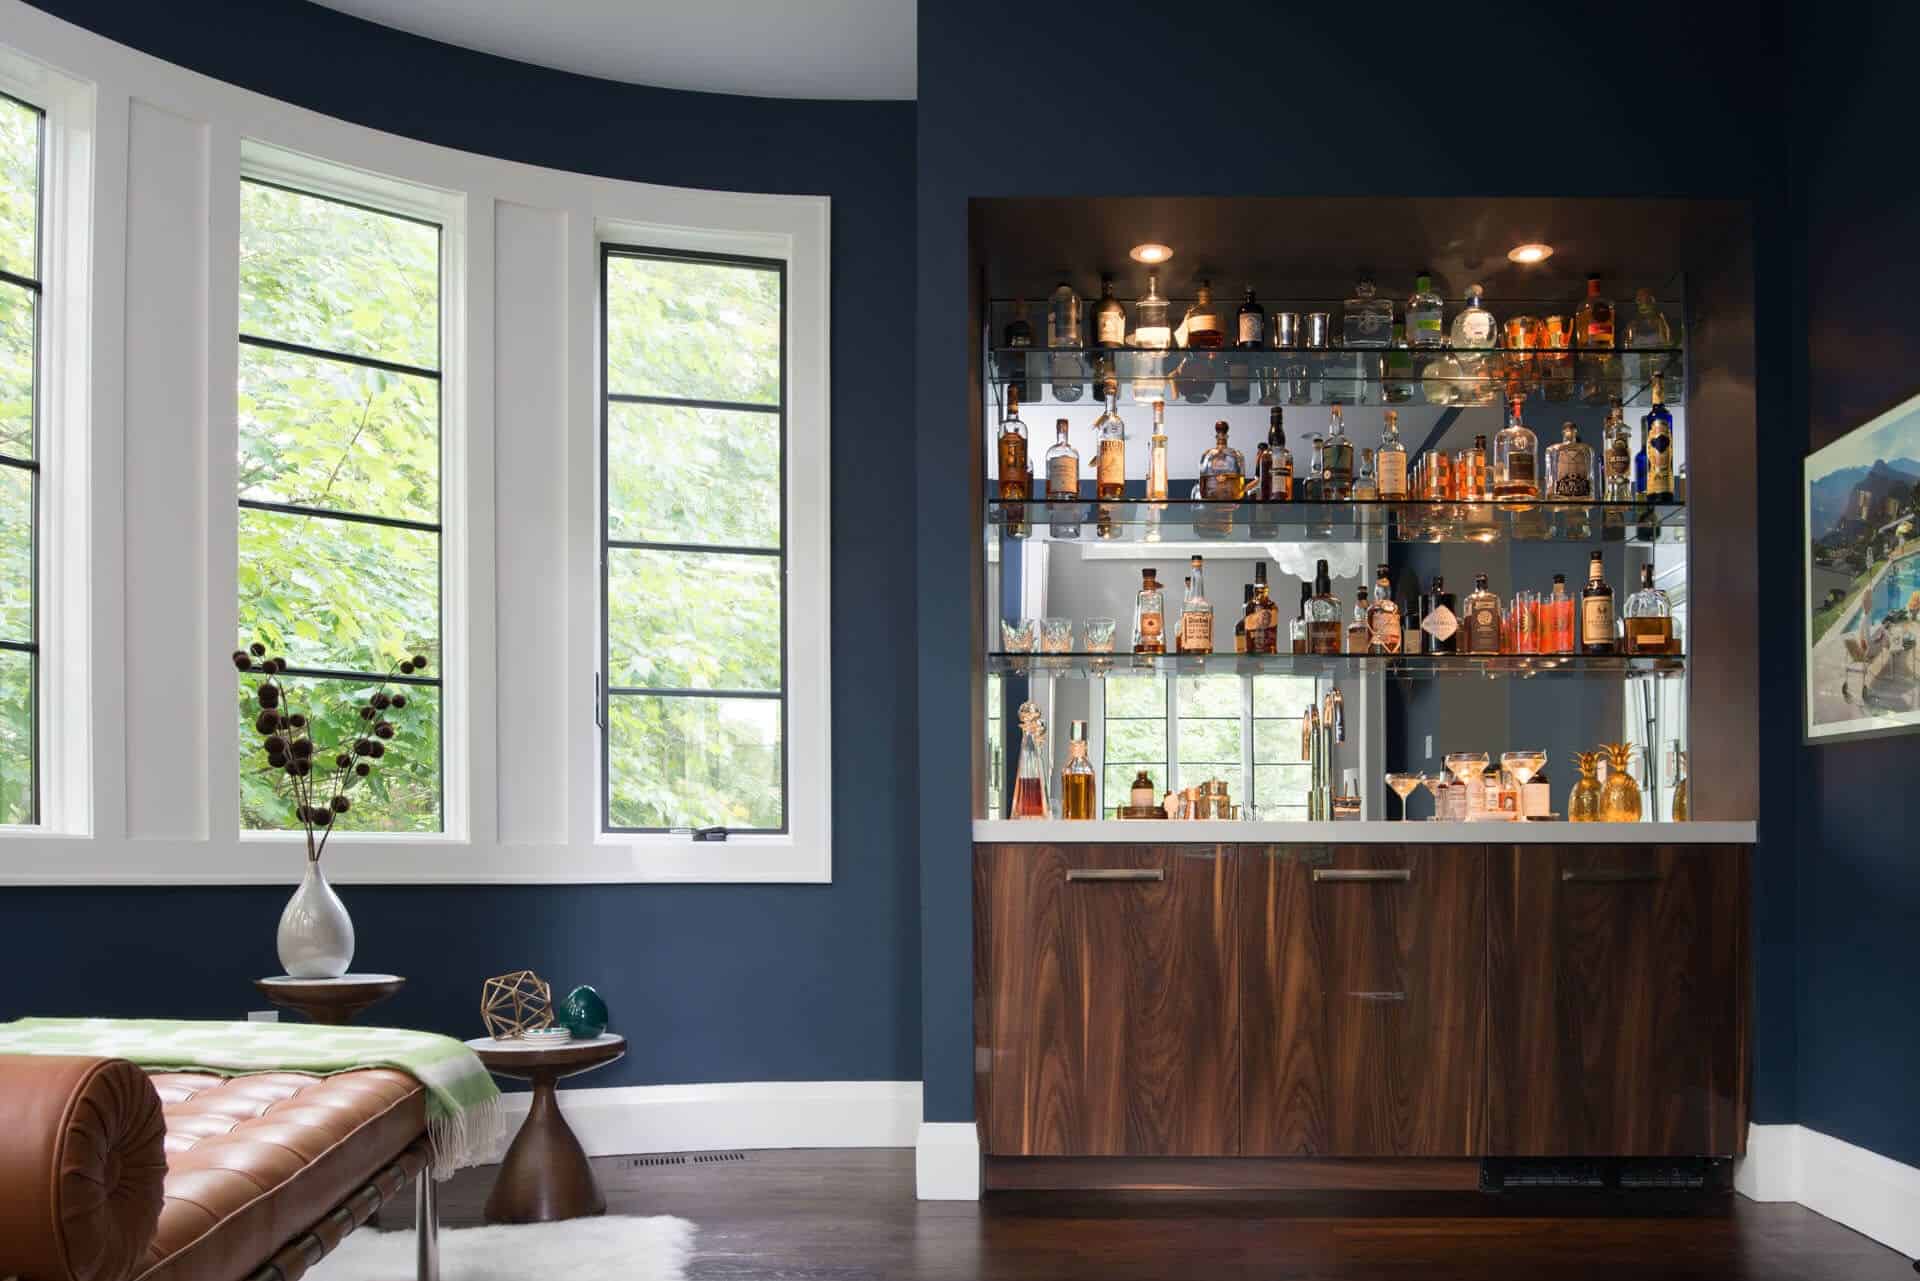 Cocktail Culture: Crafting A Mid Century Modern Home Bar